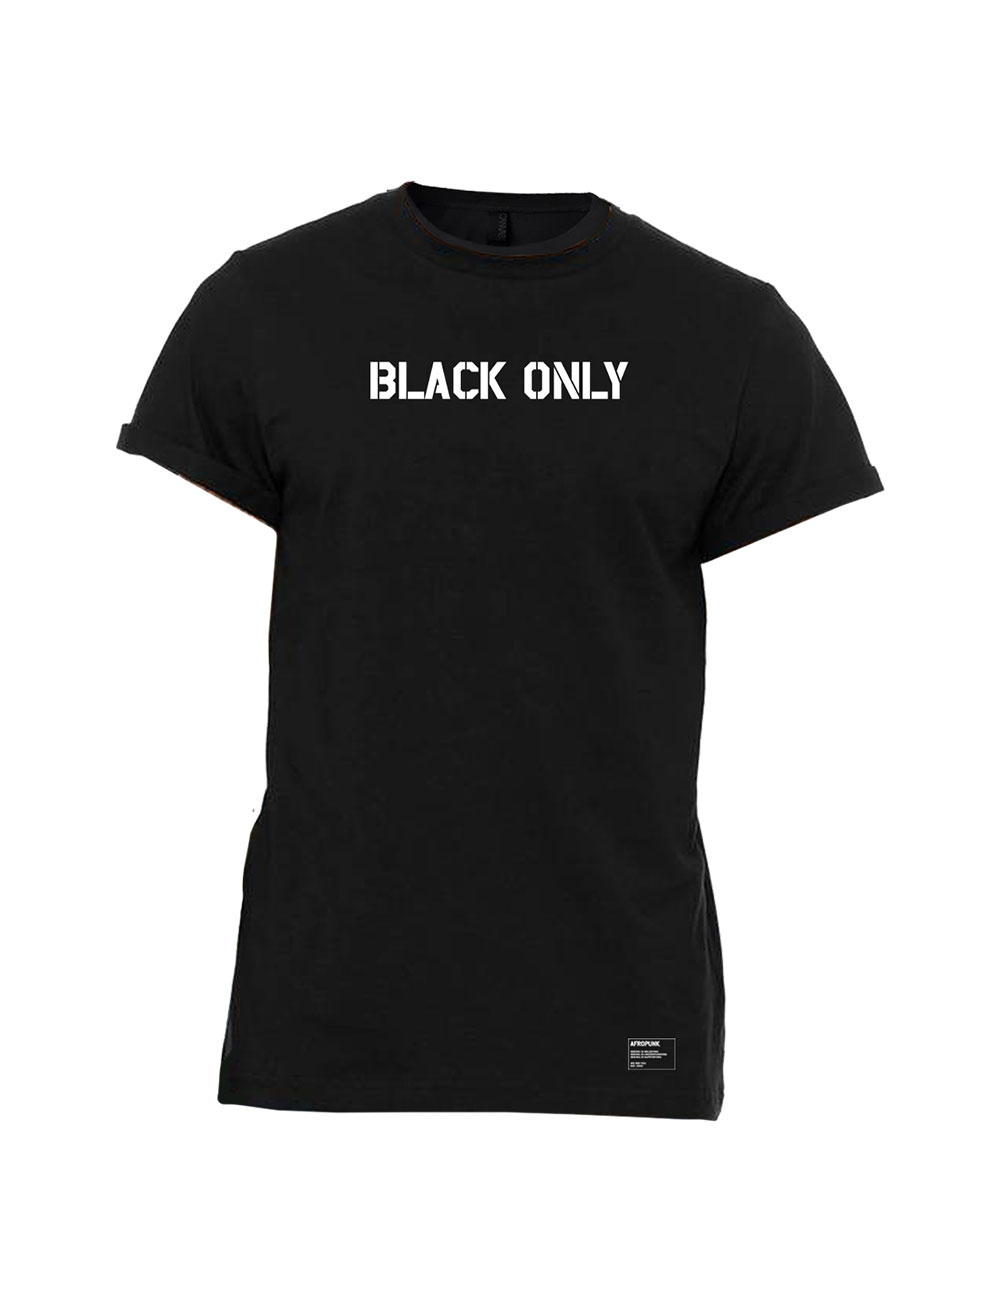 Afropunk - Official Merch Shop - T-Shirts - Black Only Large Print Rolled Cuff Tee